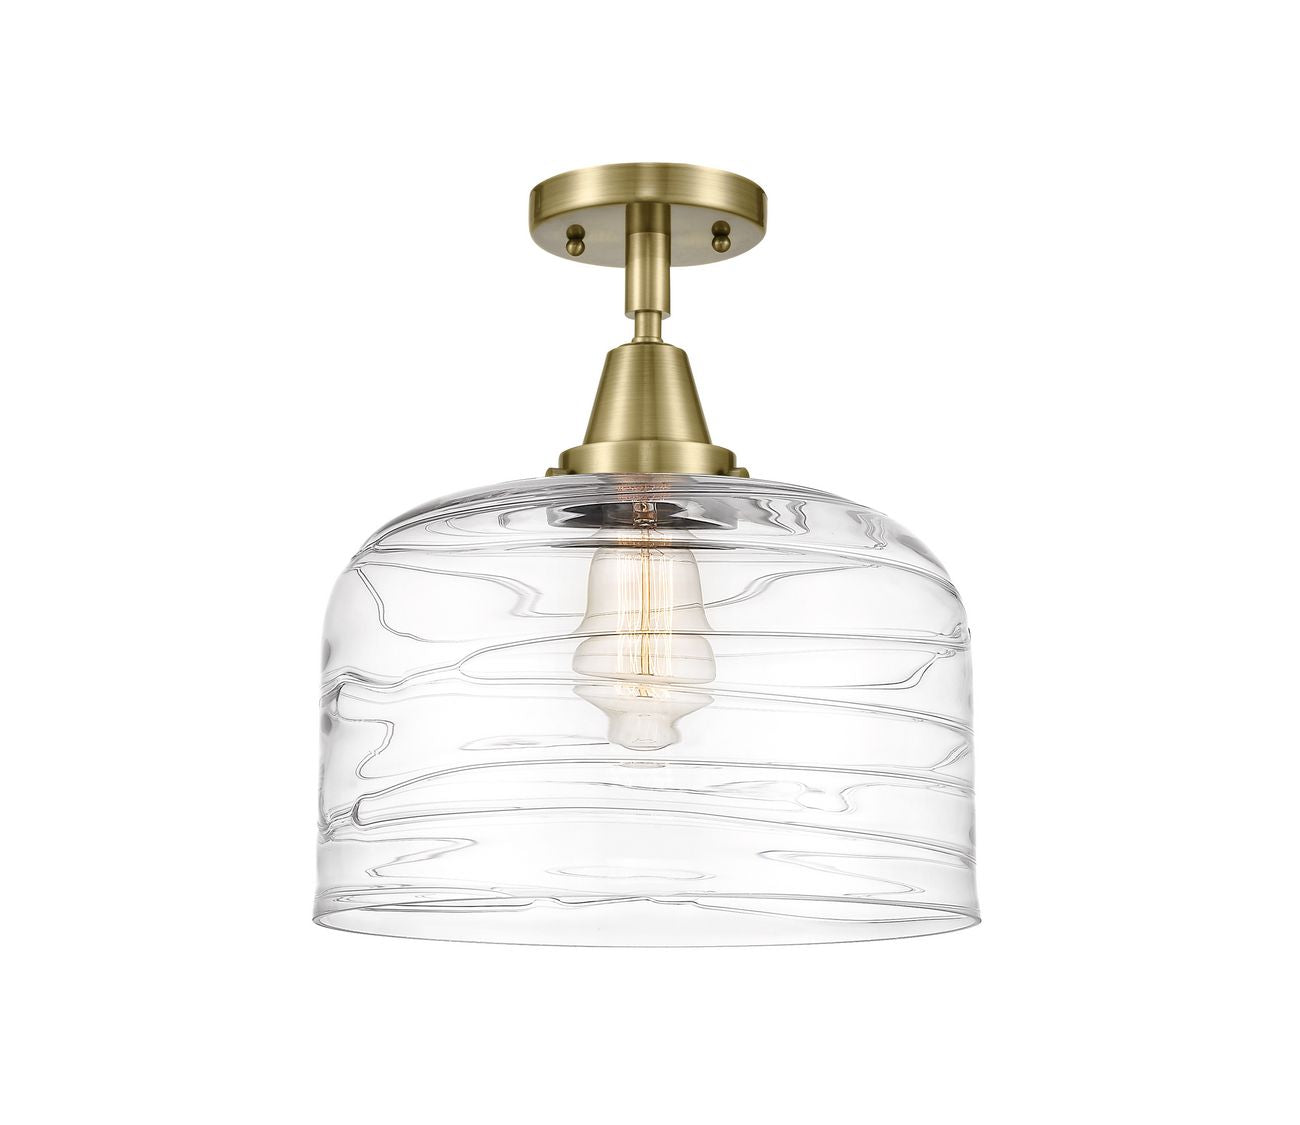 1-Light 12" X-Large Bell Flush Mount - Bell-Urn Clear Deco Swirl Glass - Choice of Finish And Incandesent Or LED Bulbs